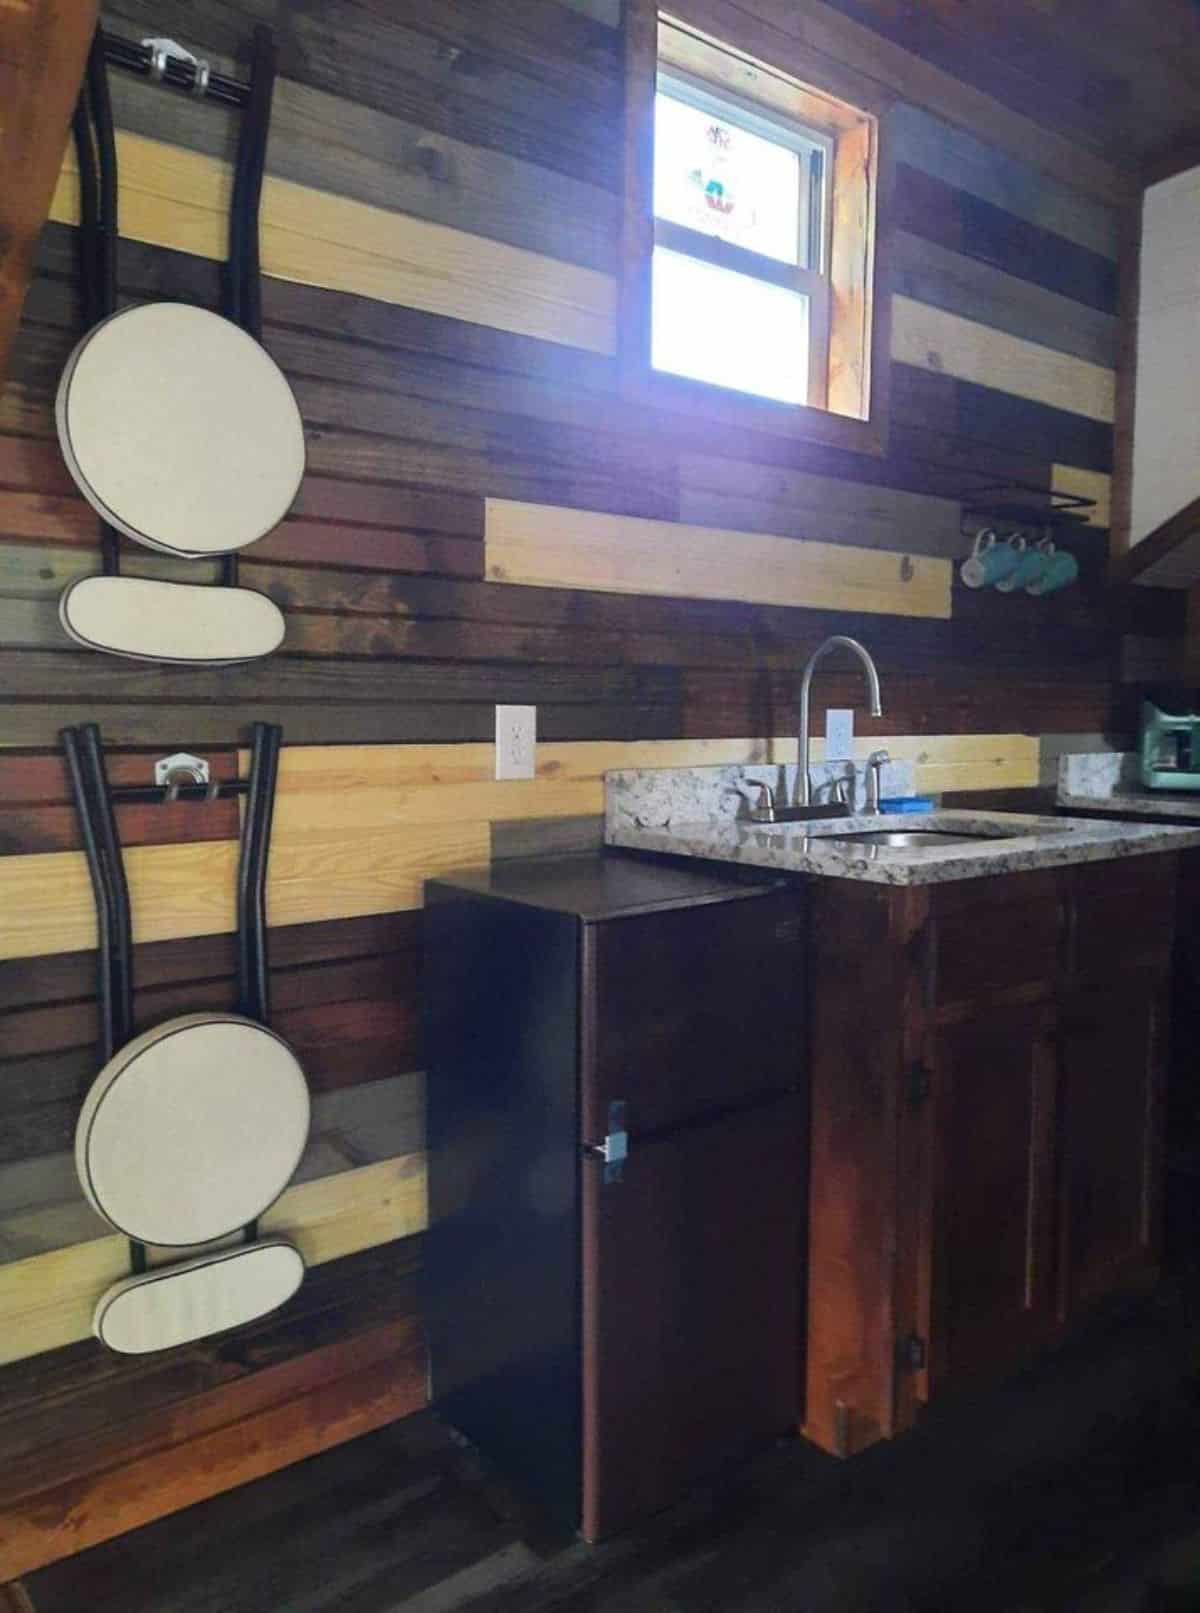 Kitchen area of 24’ Tiny Cabin has a refrigerator, sink with storage